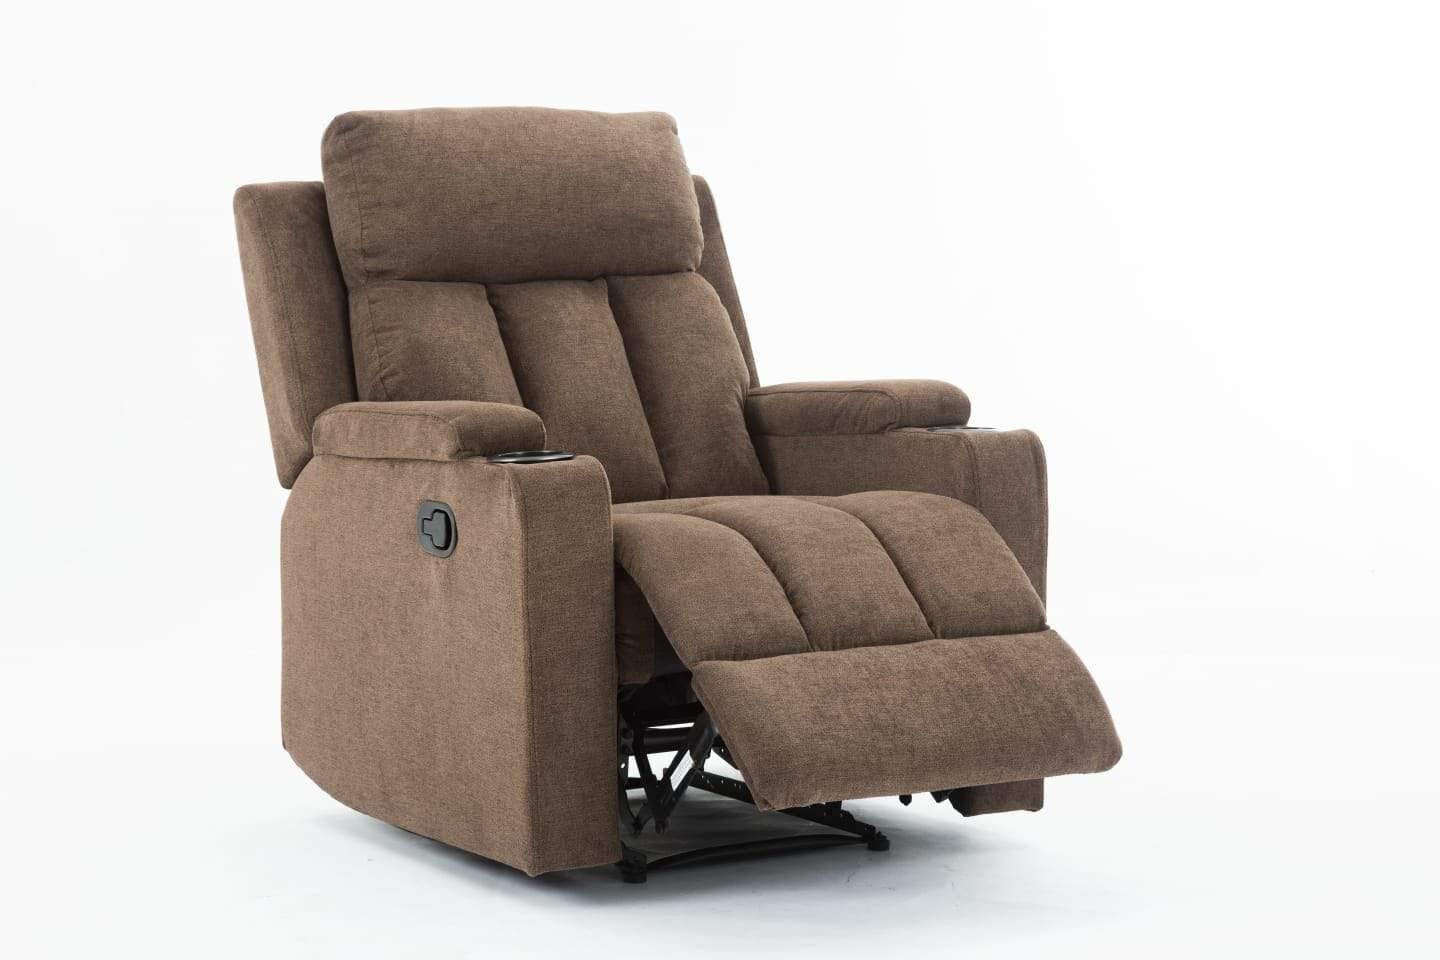 Recliner Chair Ottomanson in Houston-Texas from Asy Furniture